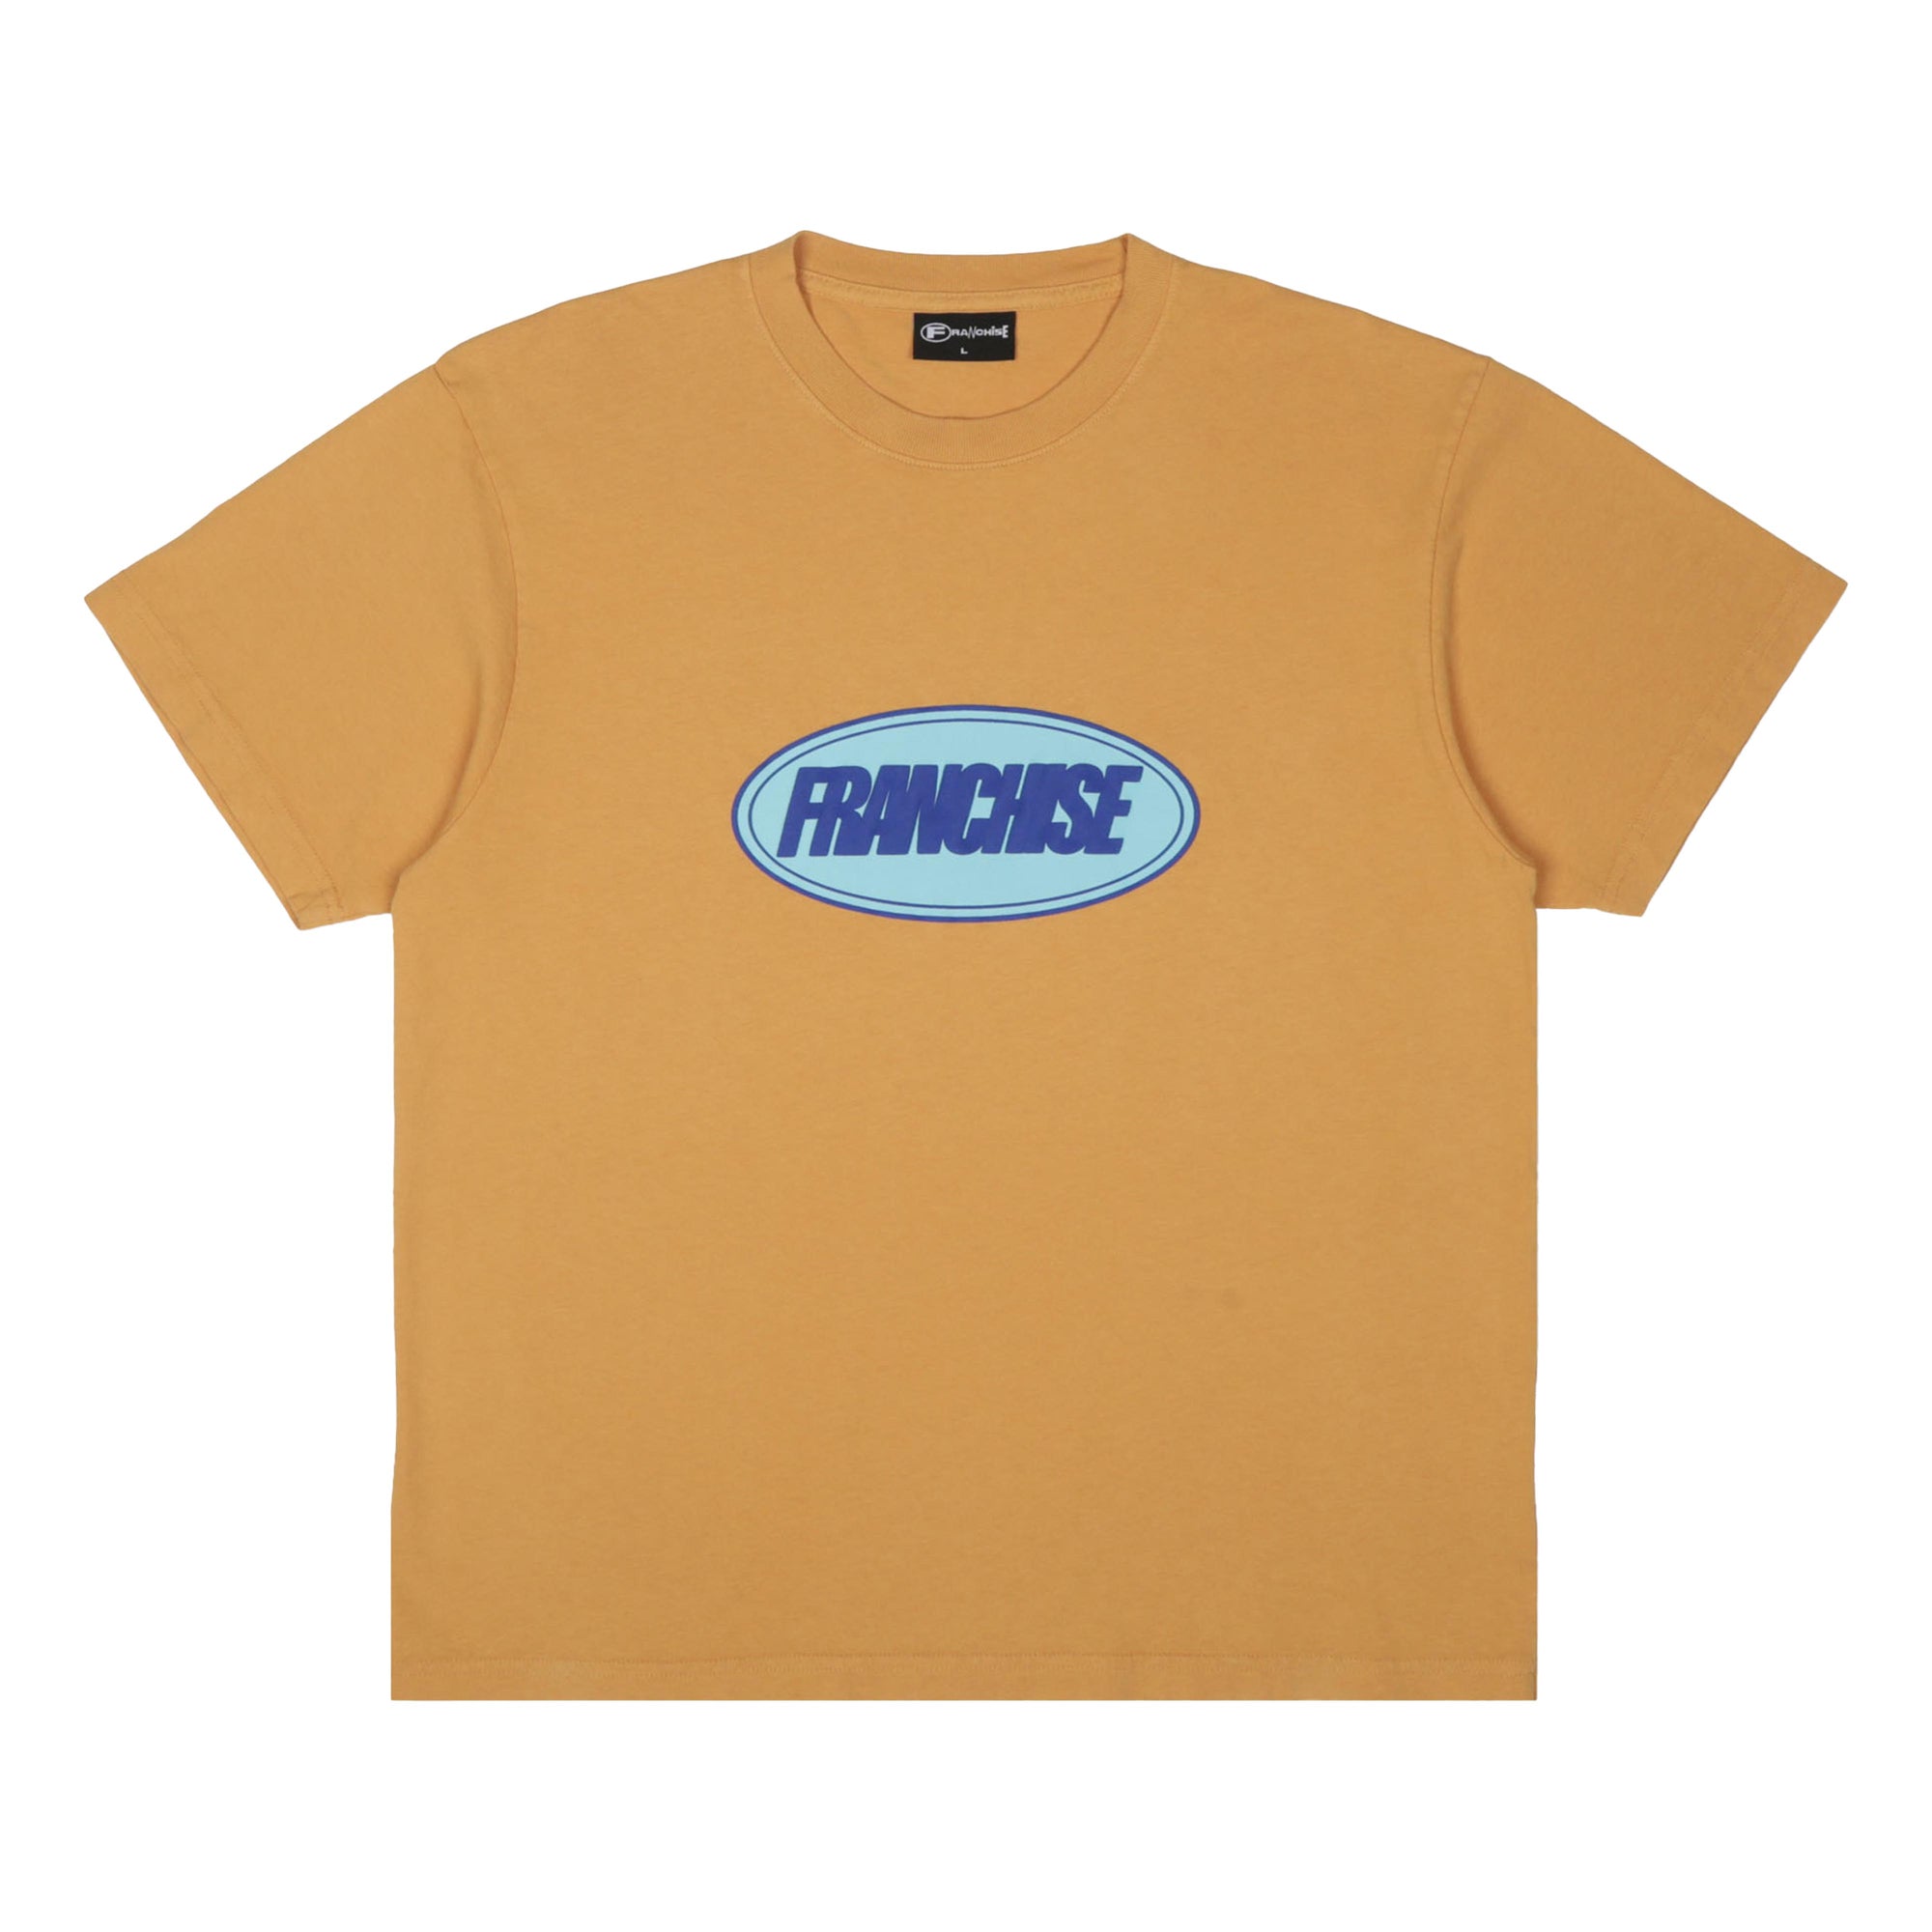 Franchise - Corporate Athletics T-Shirt - (Goldenrod) view 1